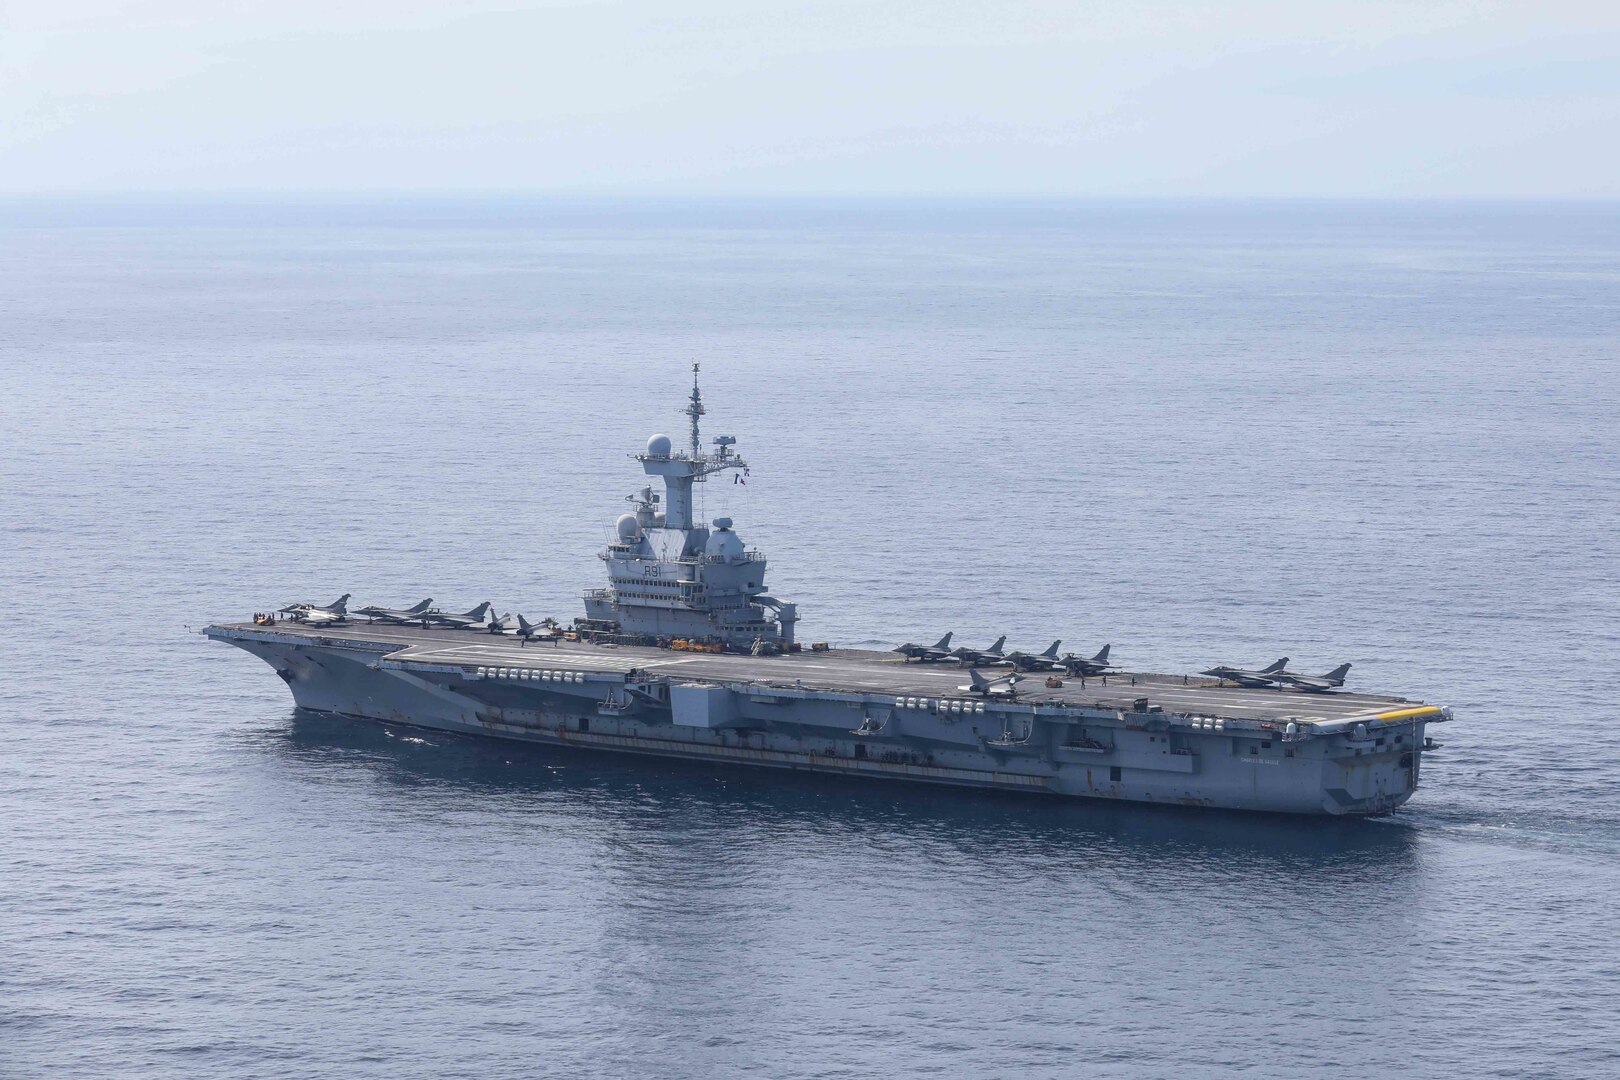 The French aircraft carrier Charles de Gaulle (R 91) transits the Mediterranean Sea while underway with Arleigh Burke-class guided-missile destroyer USS Ross (DDG 71), March 17.